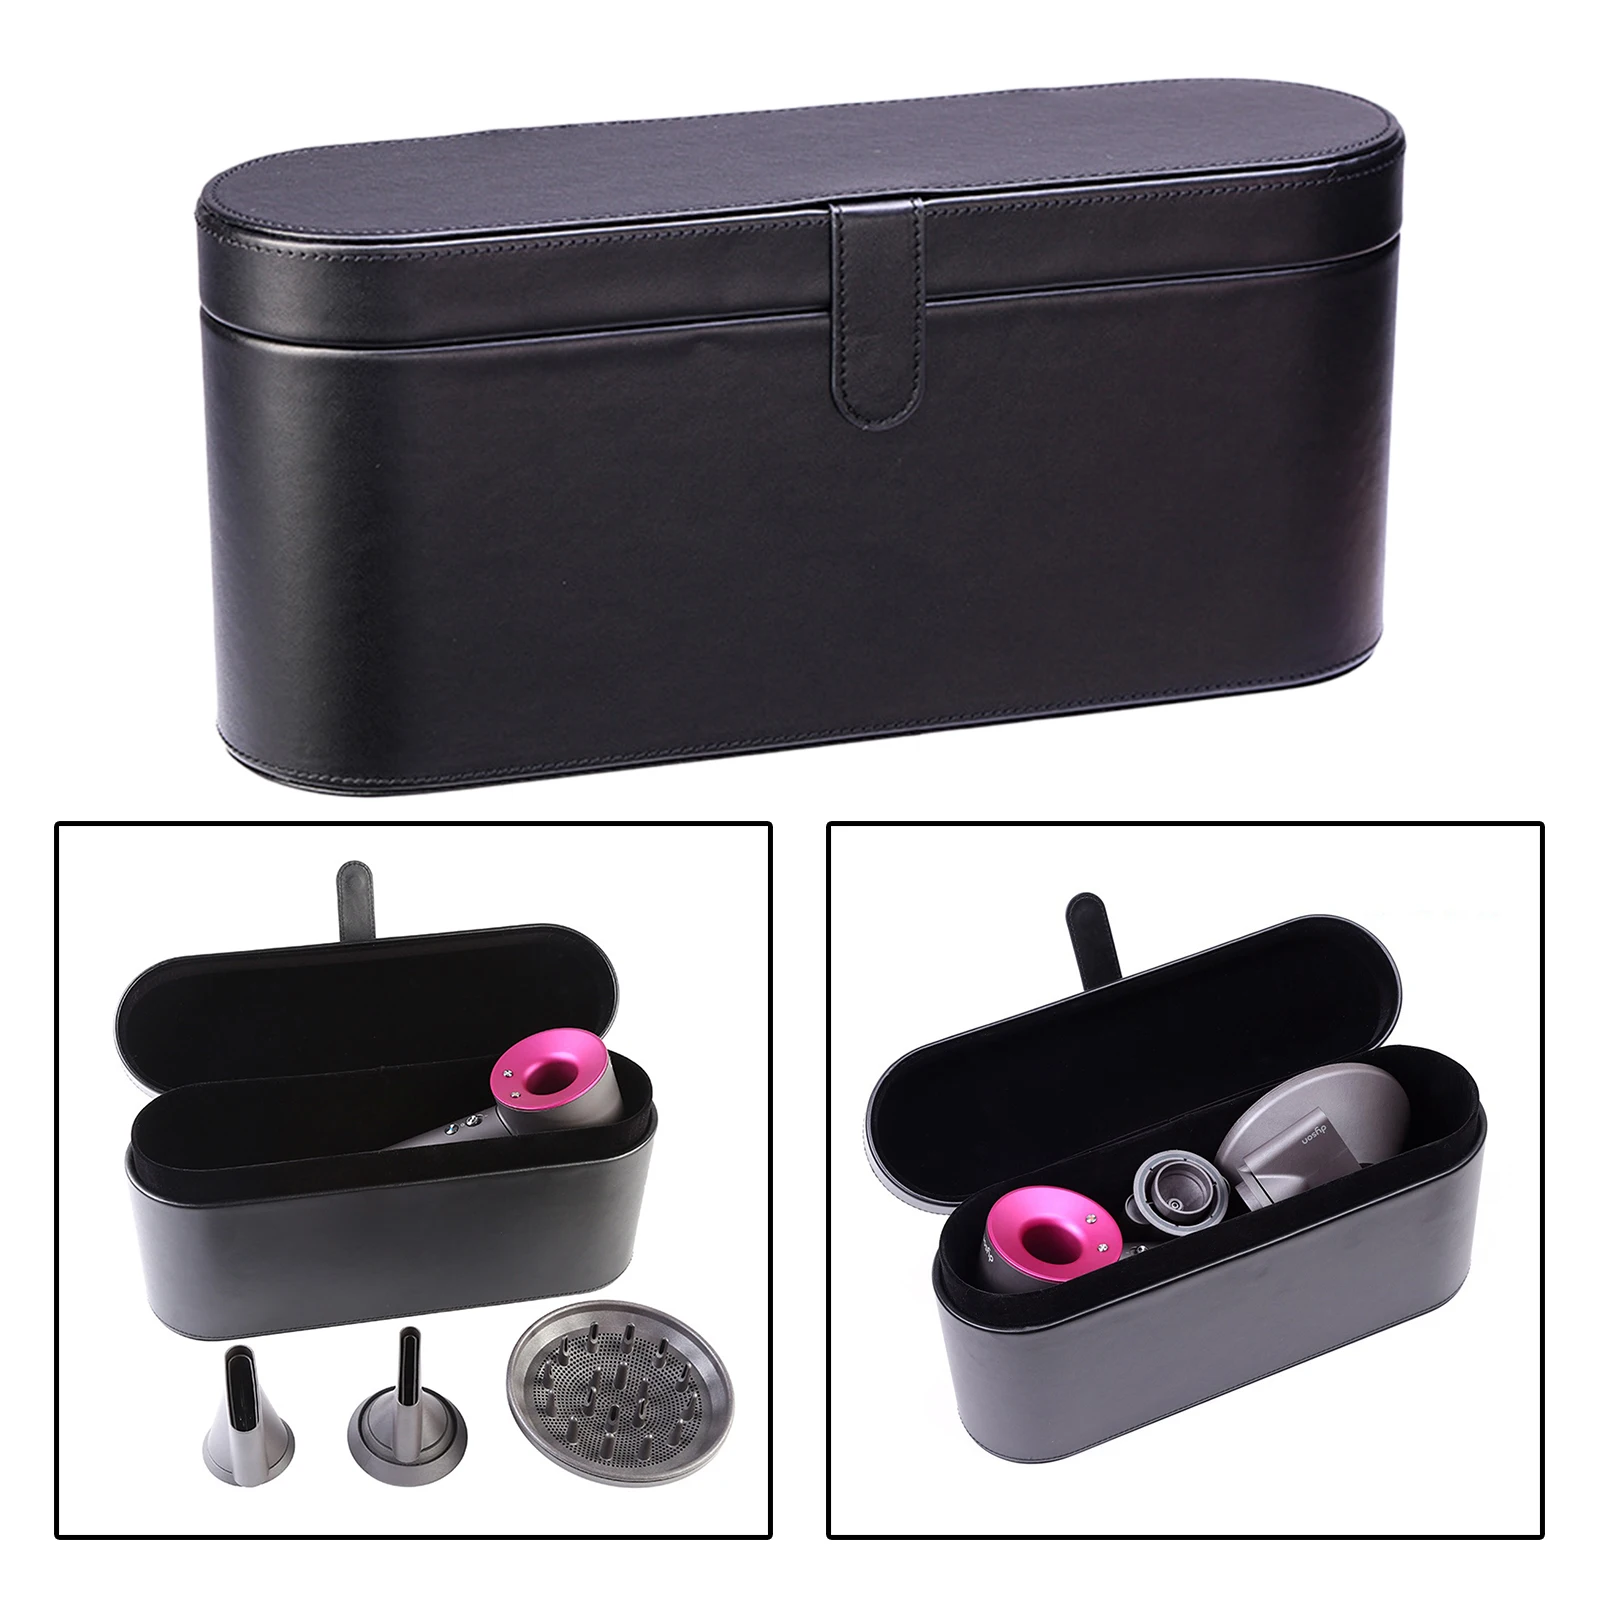 Portable PU Leather Hair Dryer Storage Box for Dyson Supersonic Hairdryer Compatible Hot Air Brush Accessories Organizer Bags